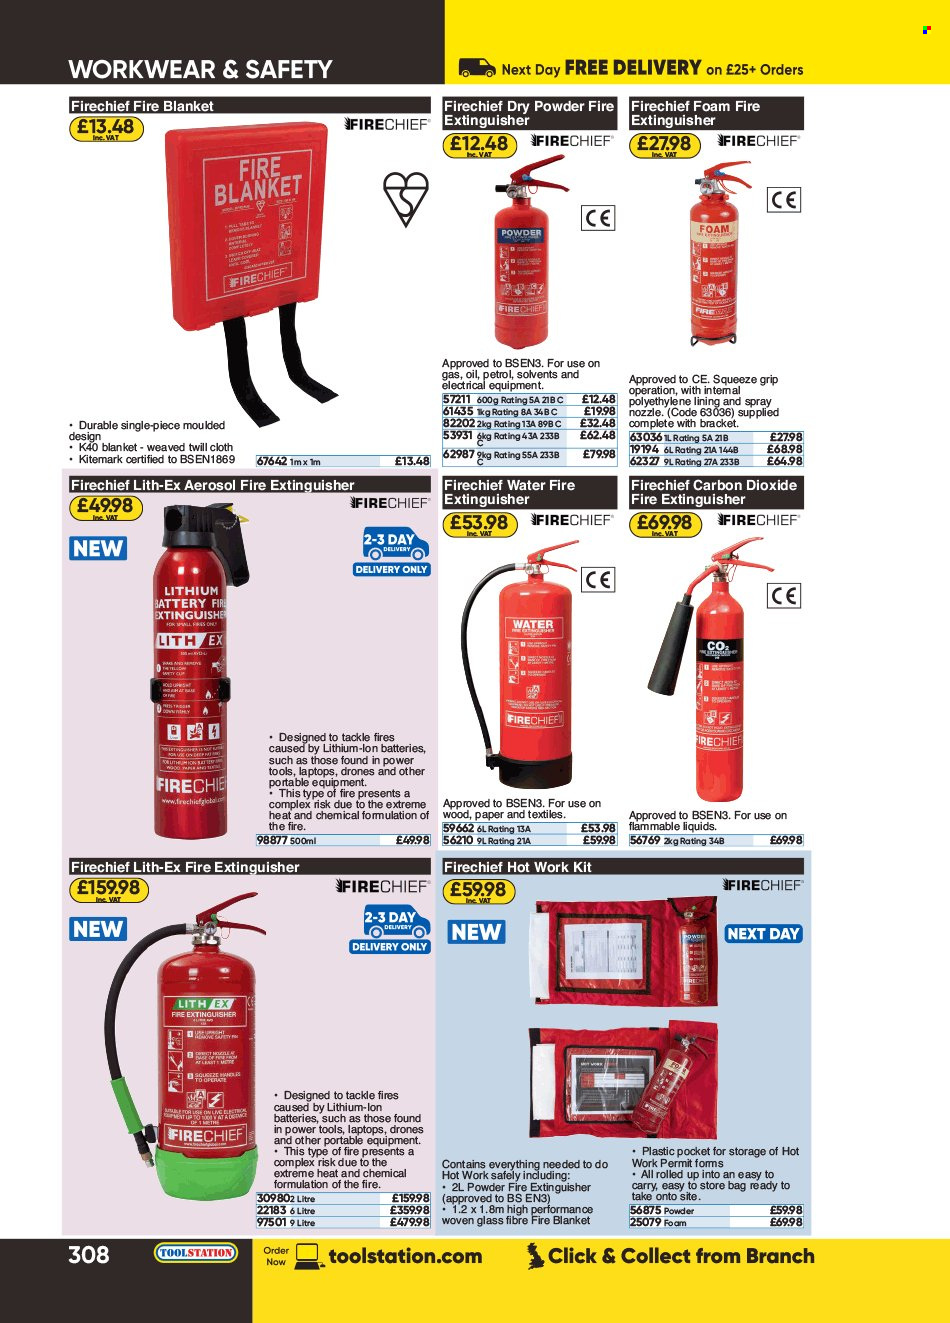 Toolstation offer . Page 308.